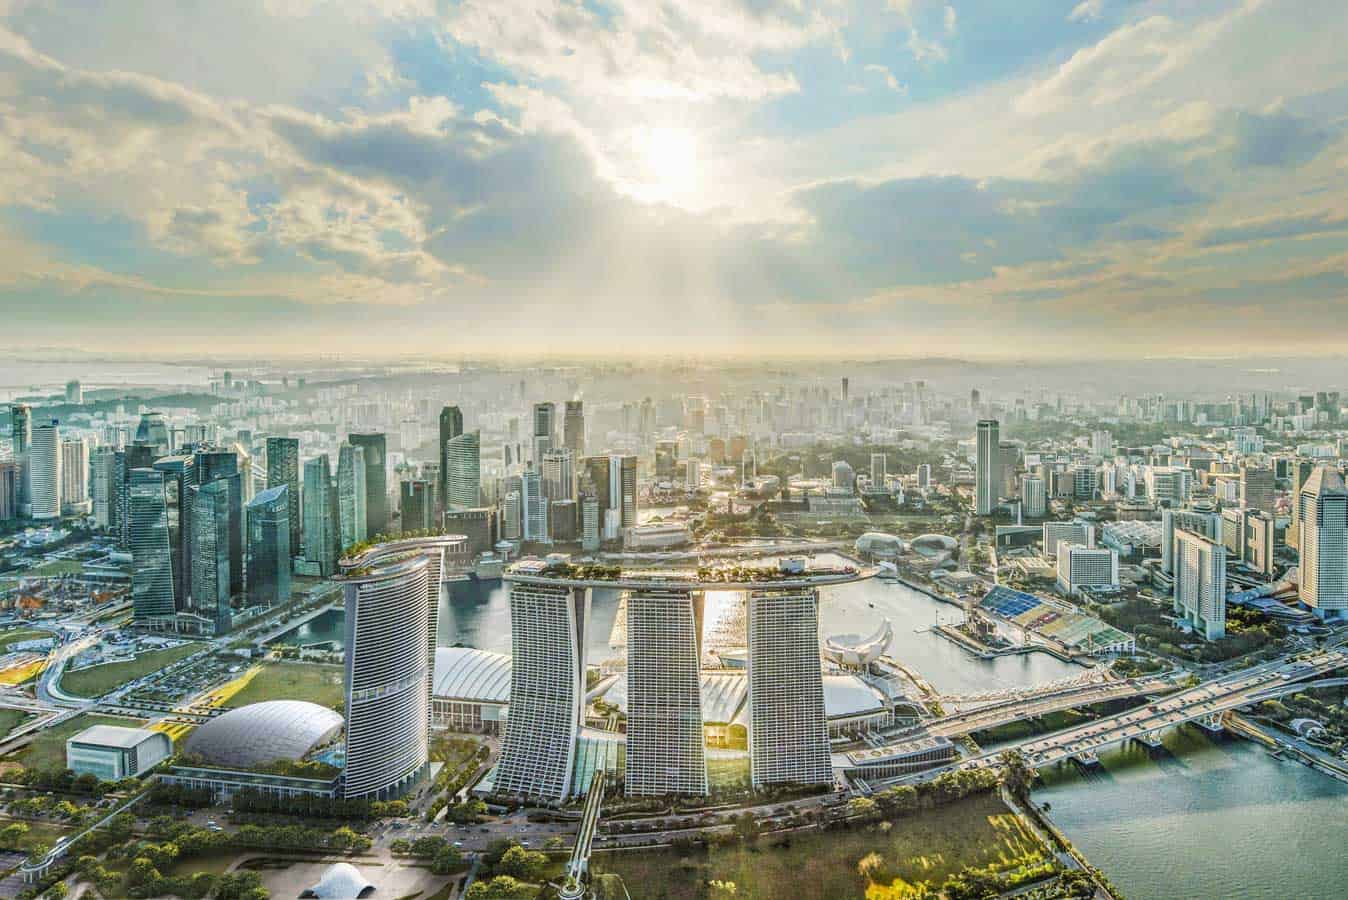 Singapore’s Marina Bay Sands Set for Major Expansion - Prevue Meetings